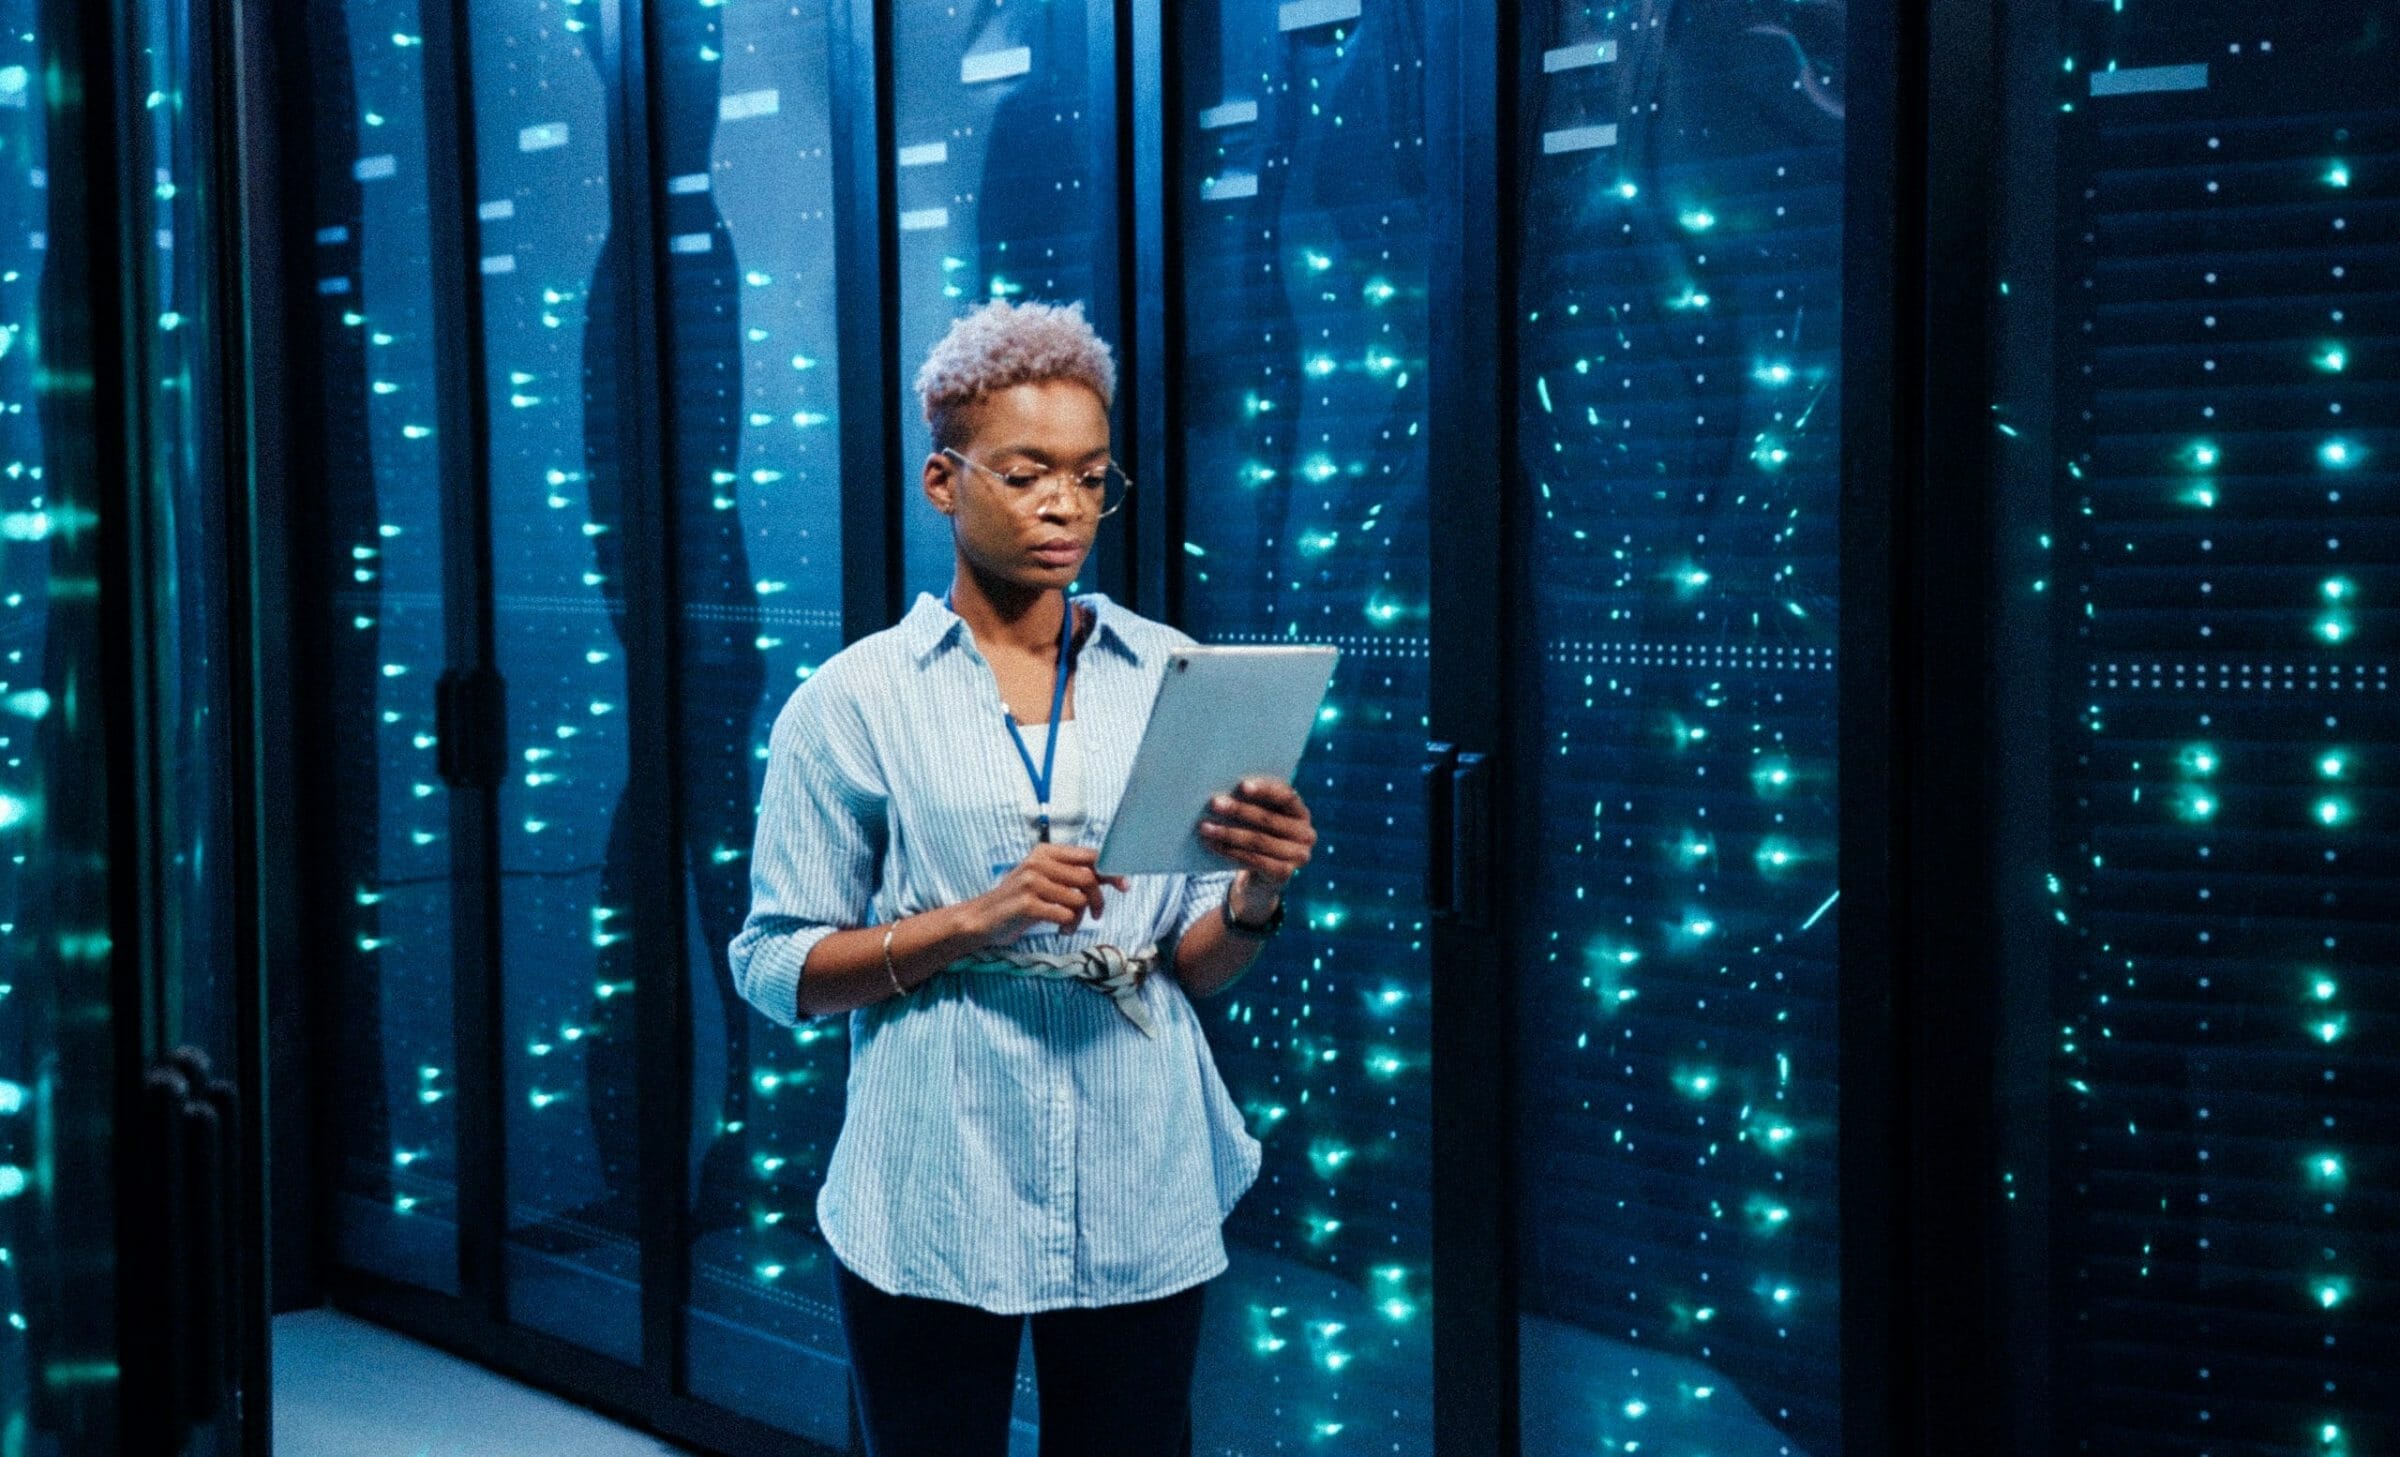 Female excalibur IT administrator walking in server corridor diagnosing hardware system performance in data center cyber secure storage.